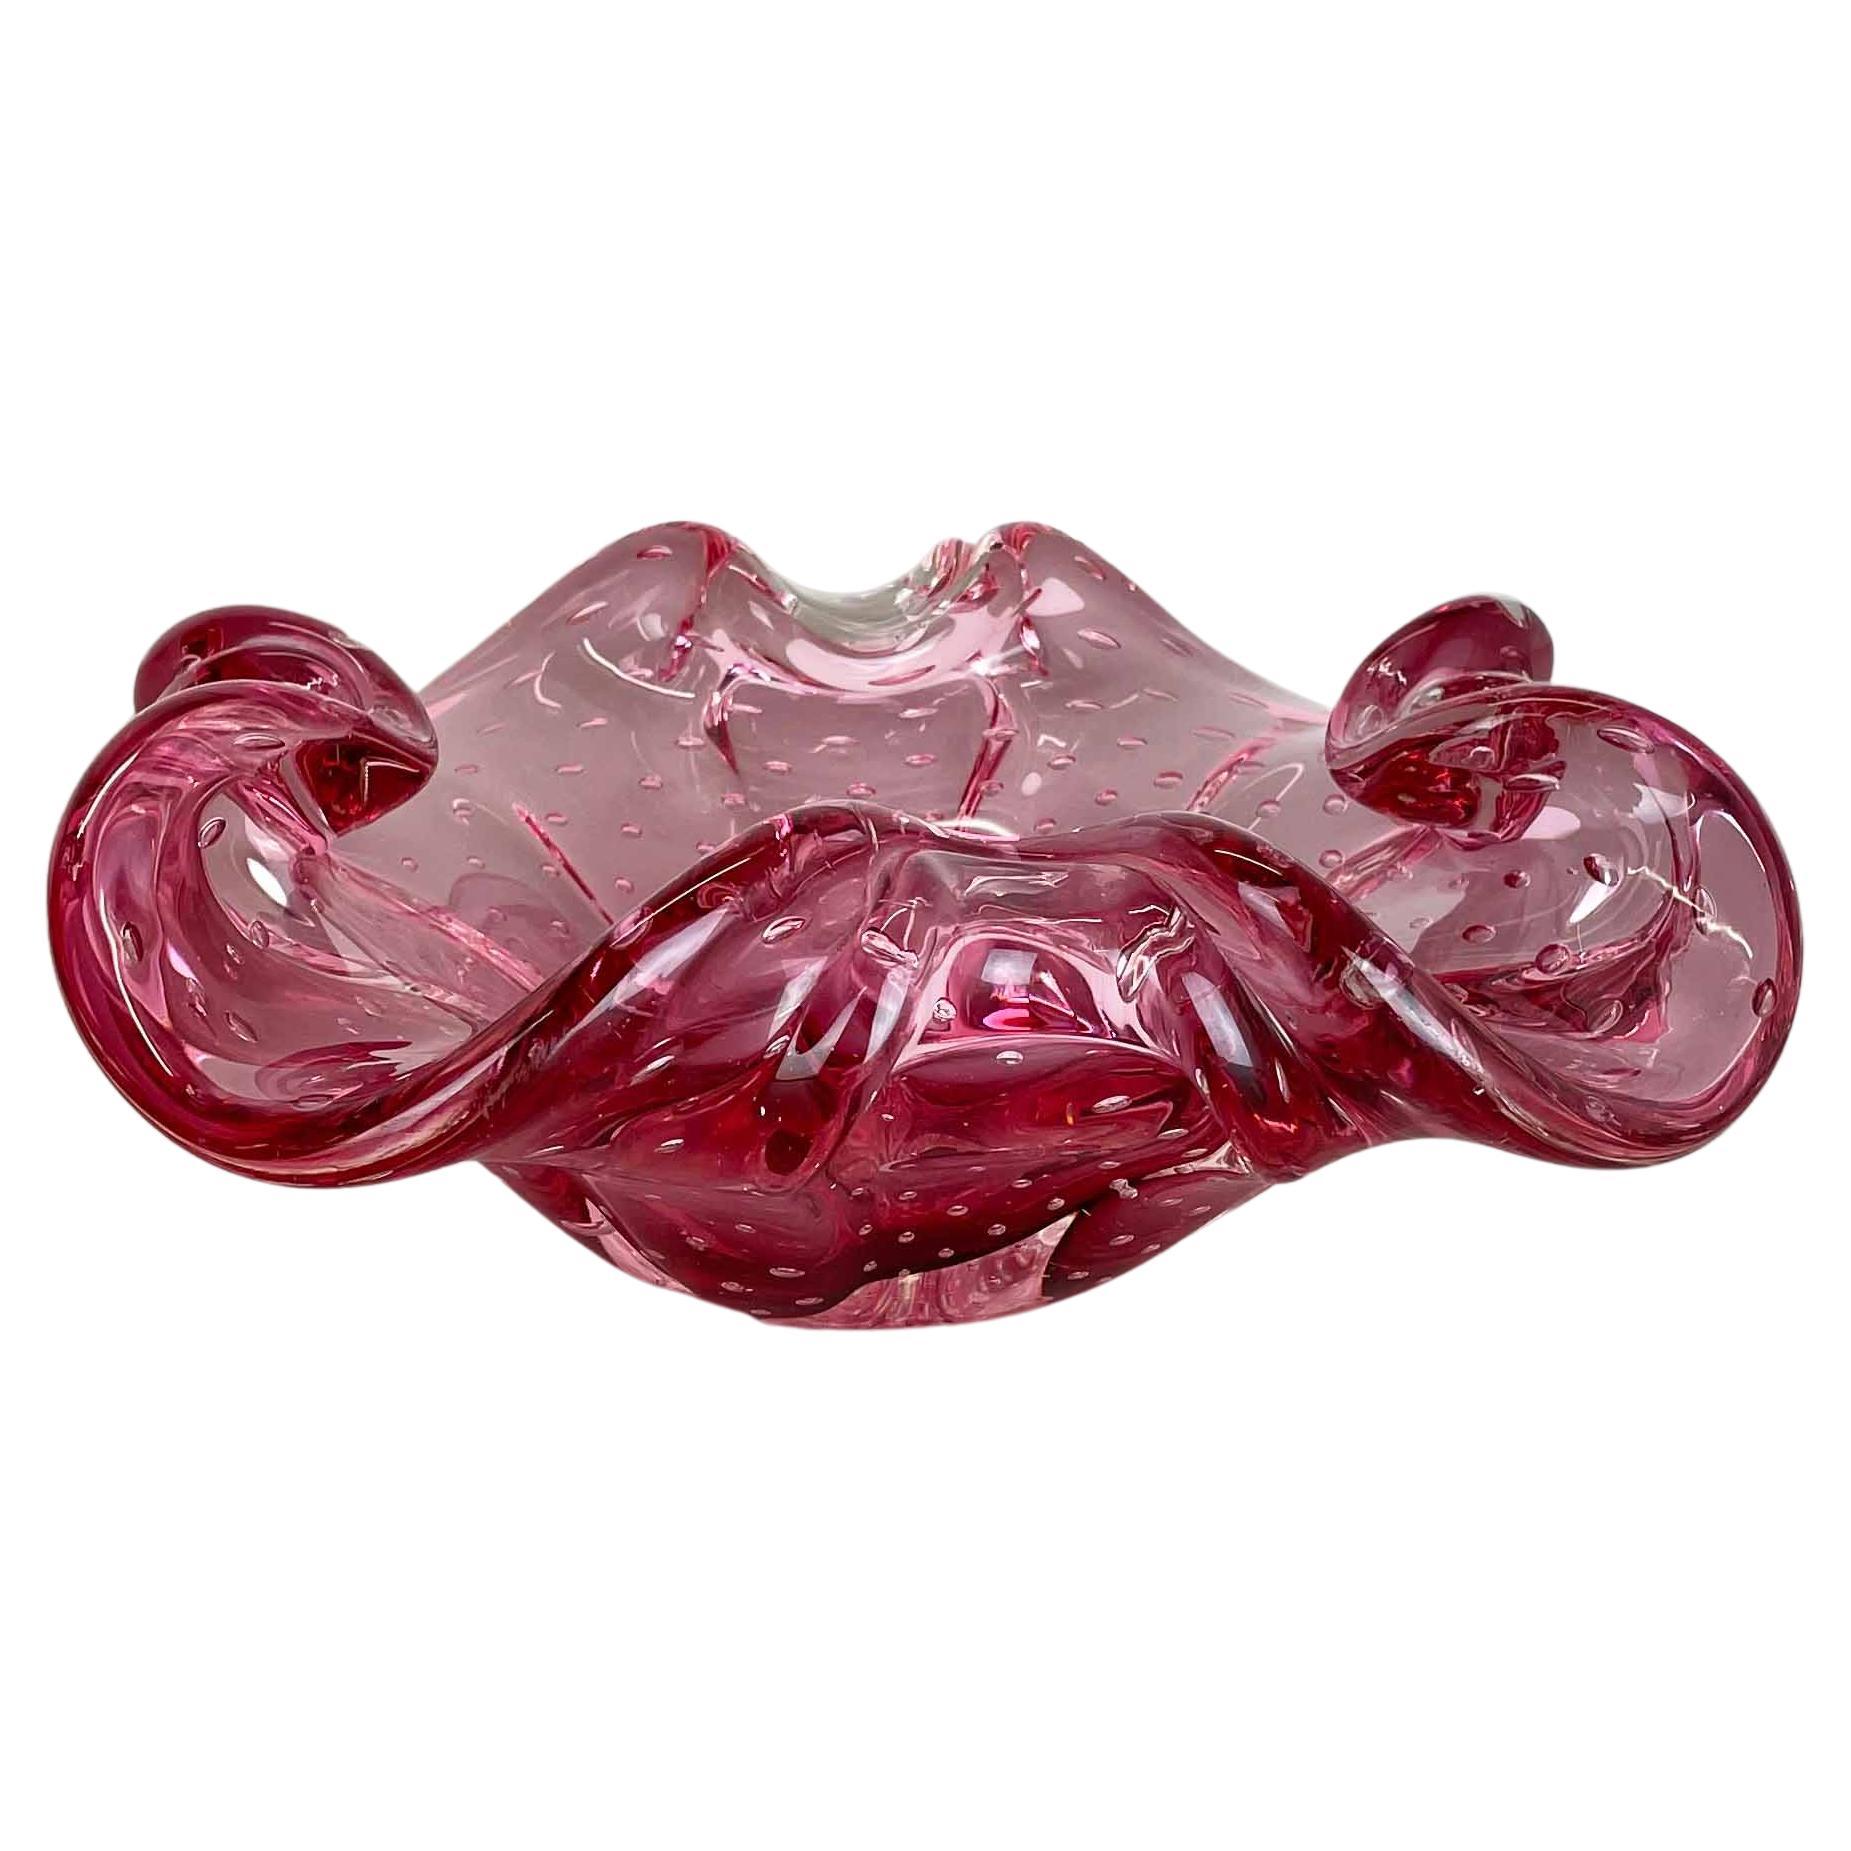 Heavy 3.7kg Rare Extra Large Shell Bowl "PINK BUBBLE" Murano Glass, Italy, 1970